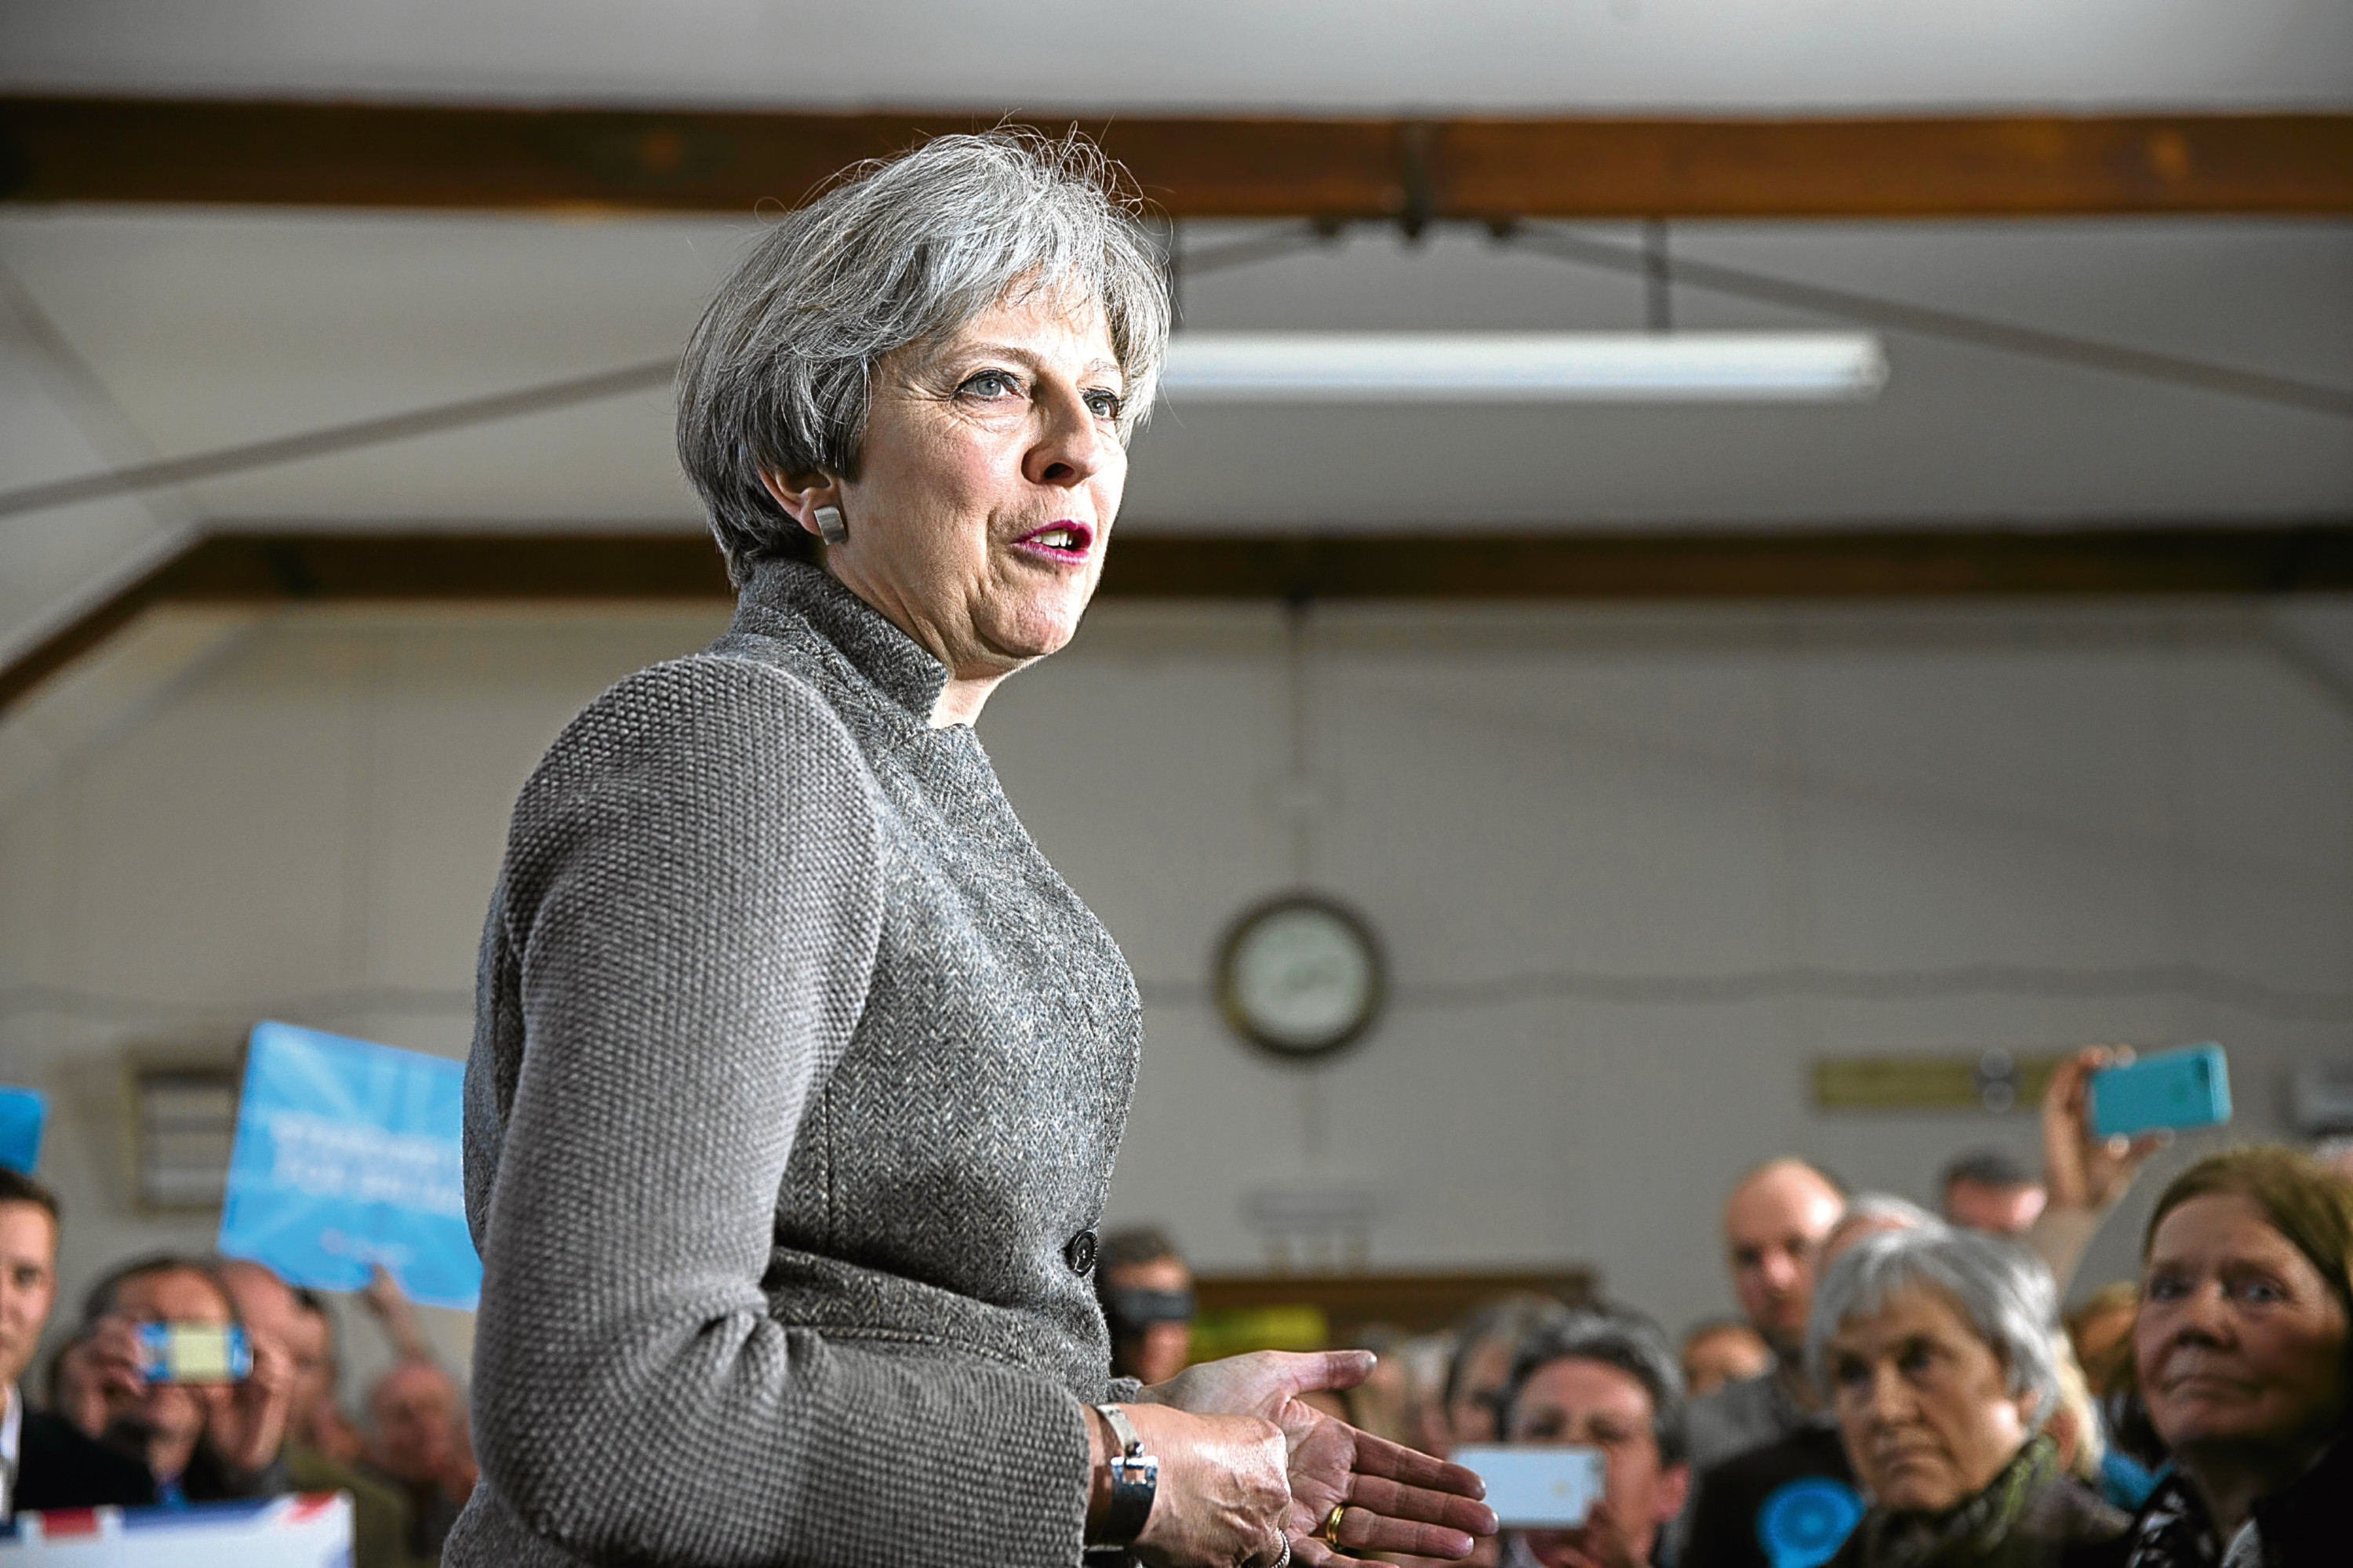 Prime Minister Theresa May makes her first campaign visit to Scotland ahead of June's snap general election. (Ross Johnston/Newsline Media)